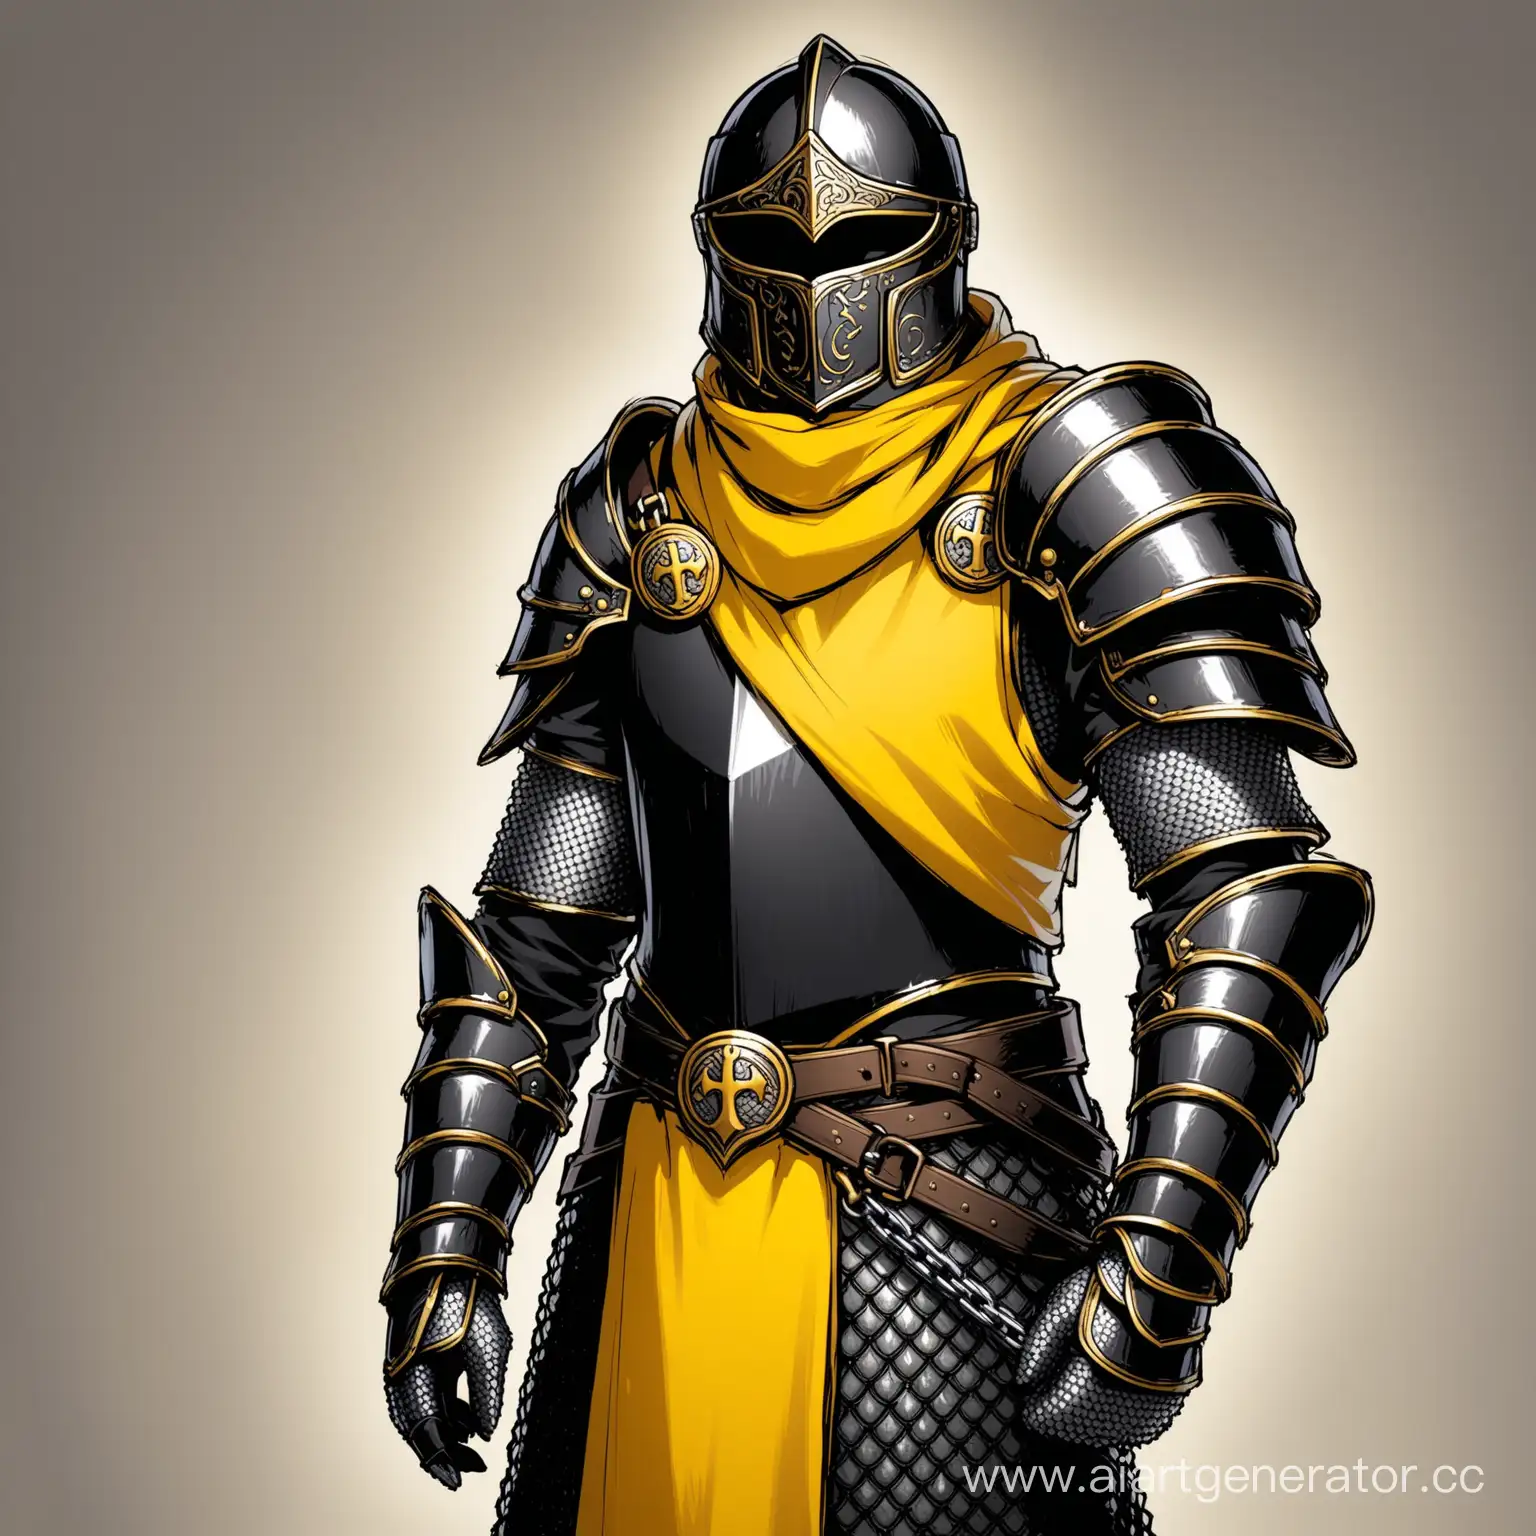 Black-Armored-Warrior-with-Yellow-Tabard-and-Gauntlet-Symbol